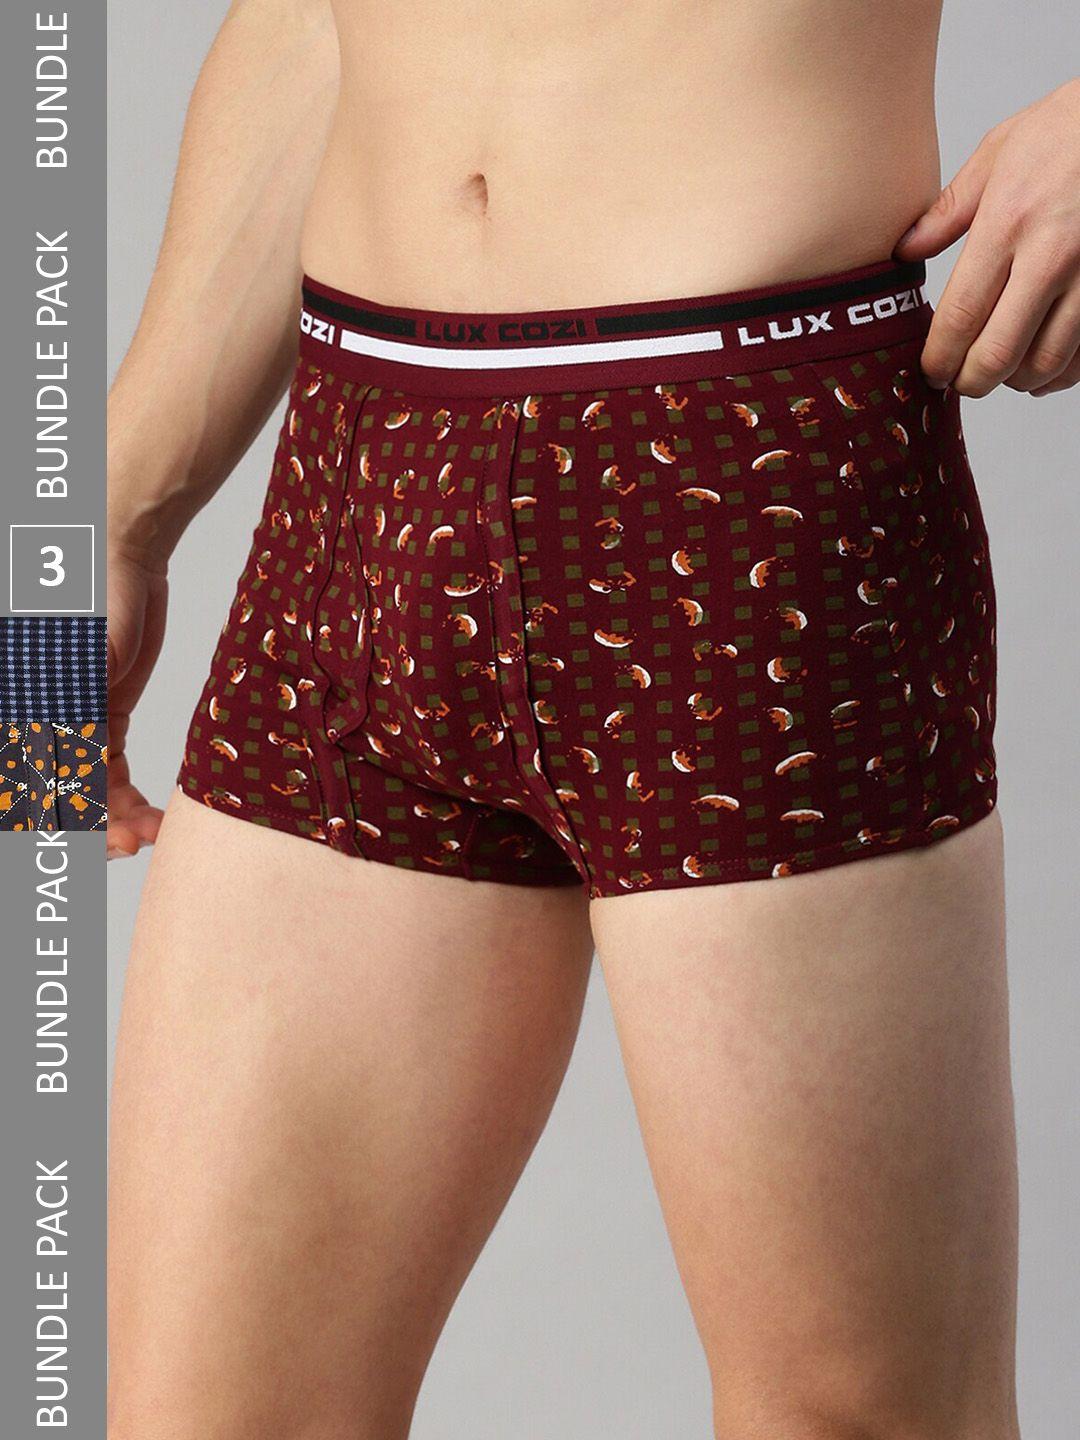 lux cozi men pack of 3 assorted skin-friendly label free comfort short cotton trunk